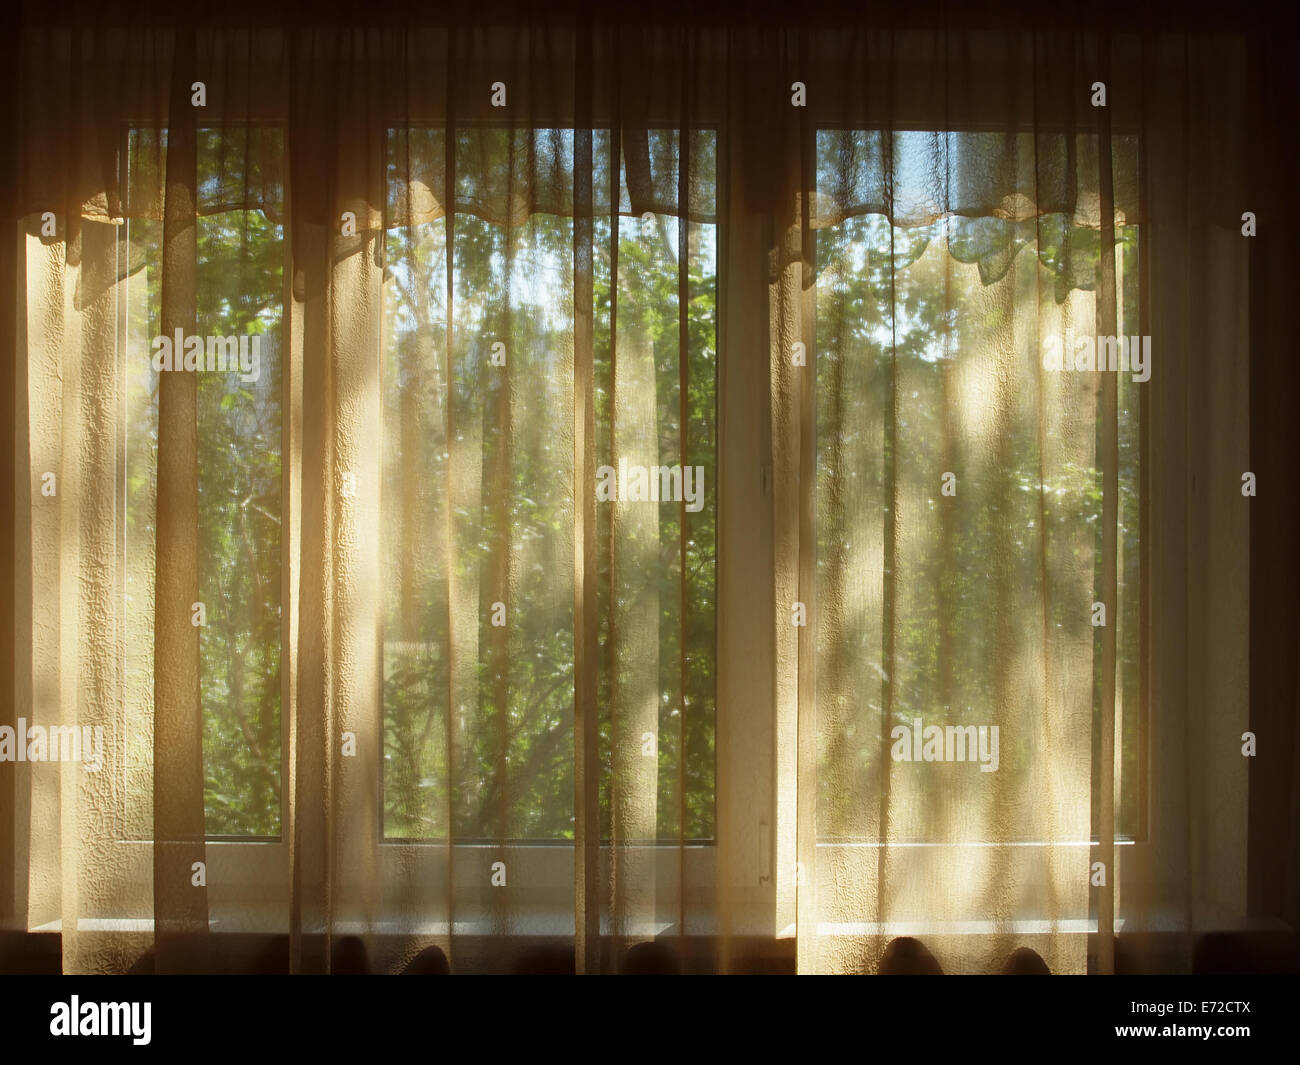 Curtained window in a dark room, a view of the green trees. Stock Photo